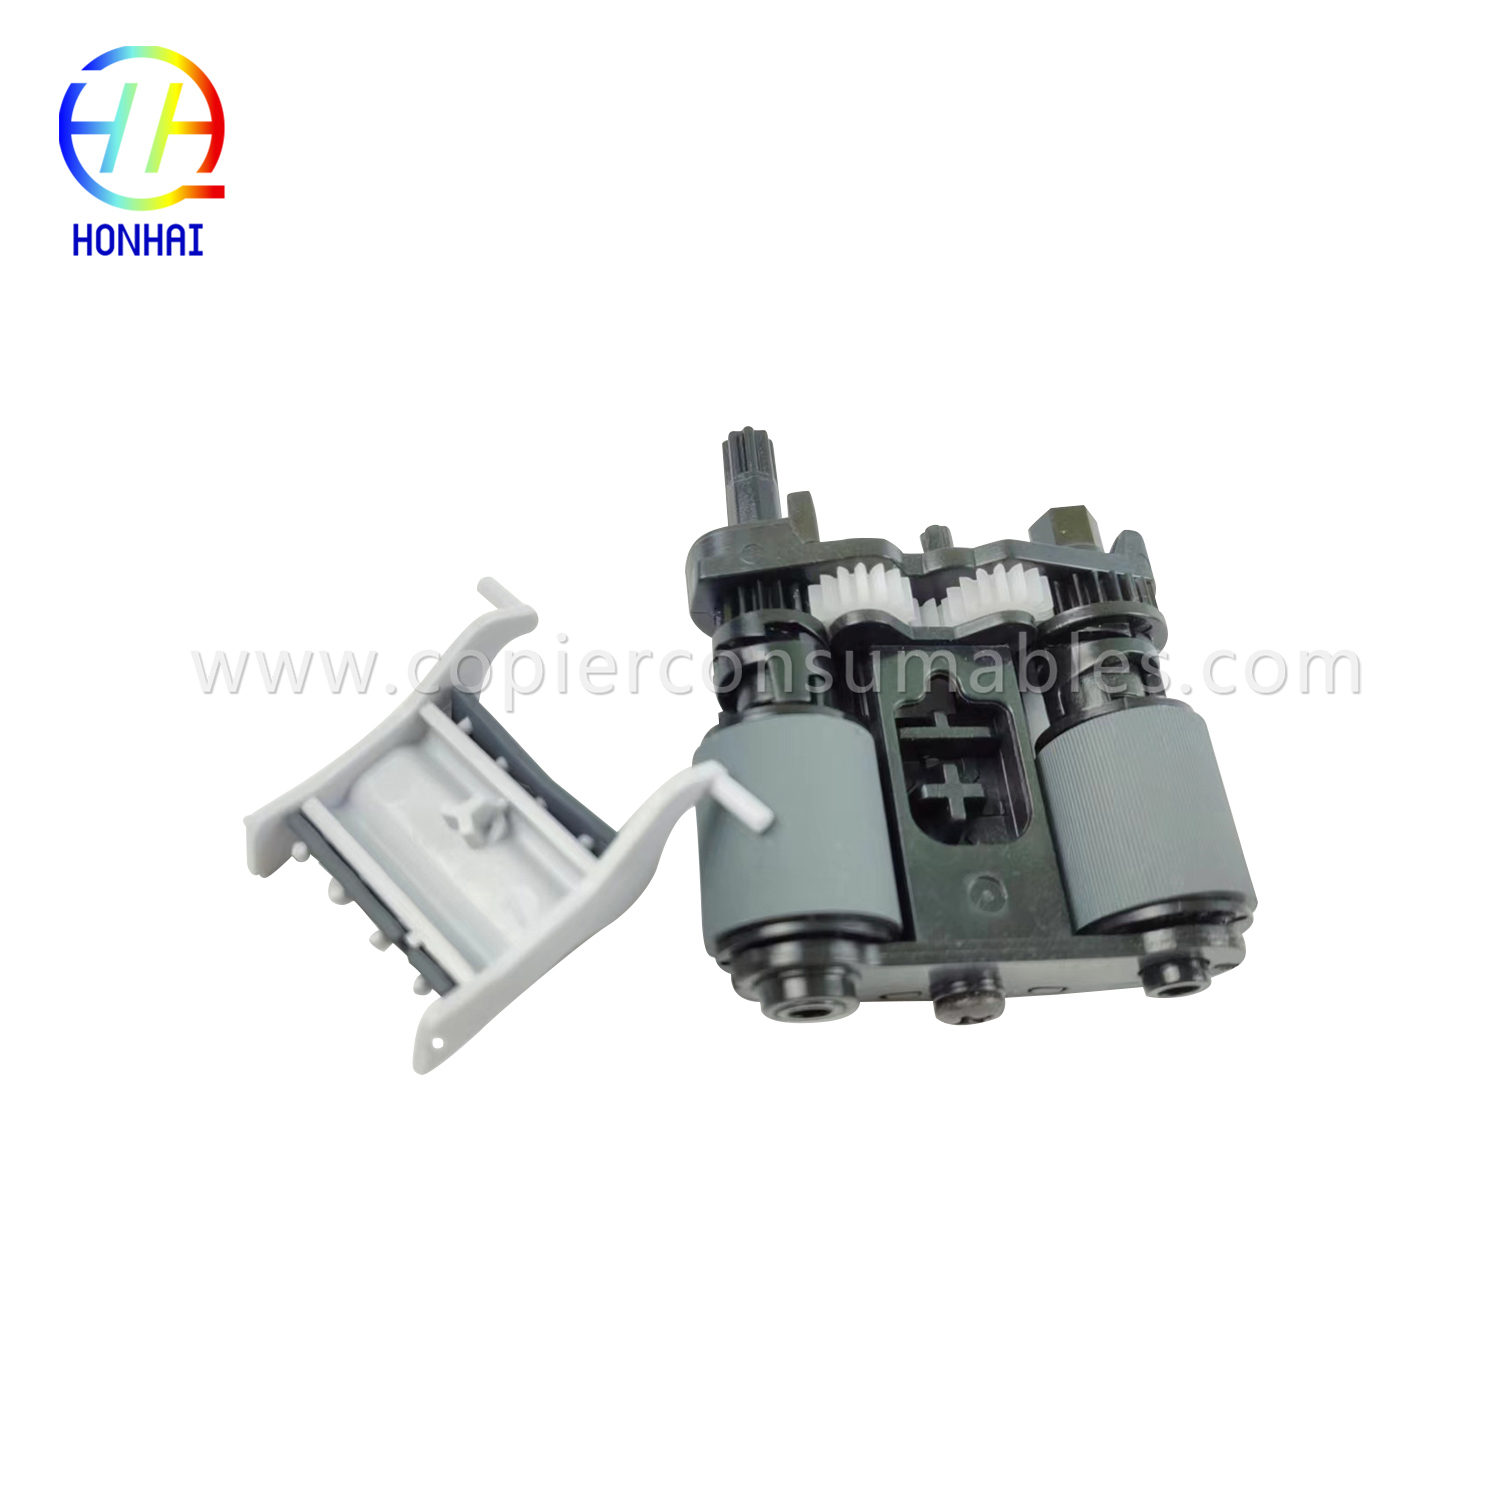 ADF Pickup Roller Assembly mo HP Color LaserJet Pro MFP M281fdw M377dw M477fdn M477fdw M477fnw M426fdn M426fdw B3Q10-60105